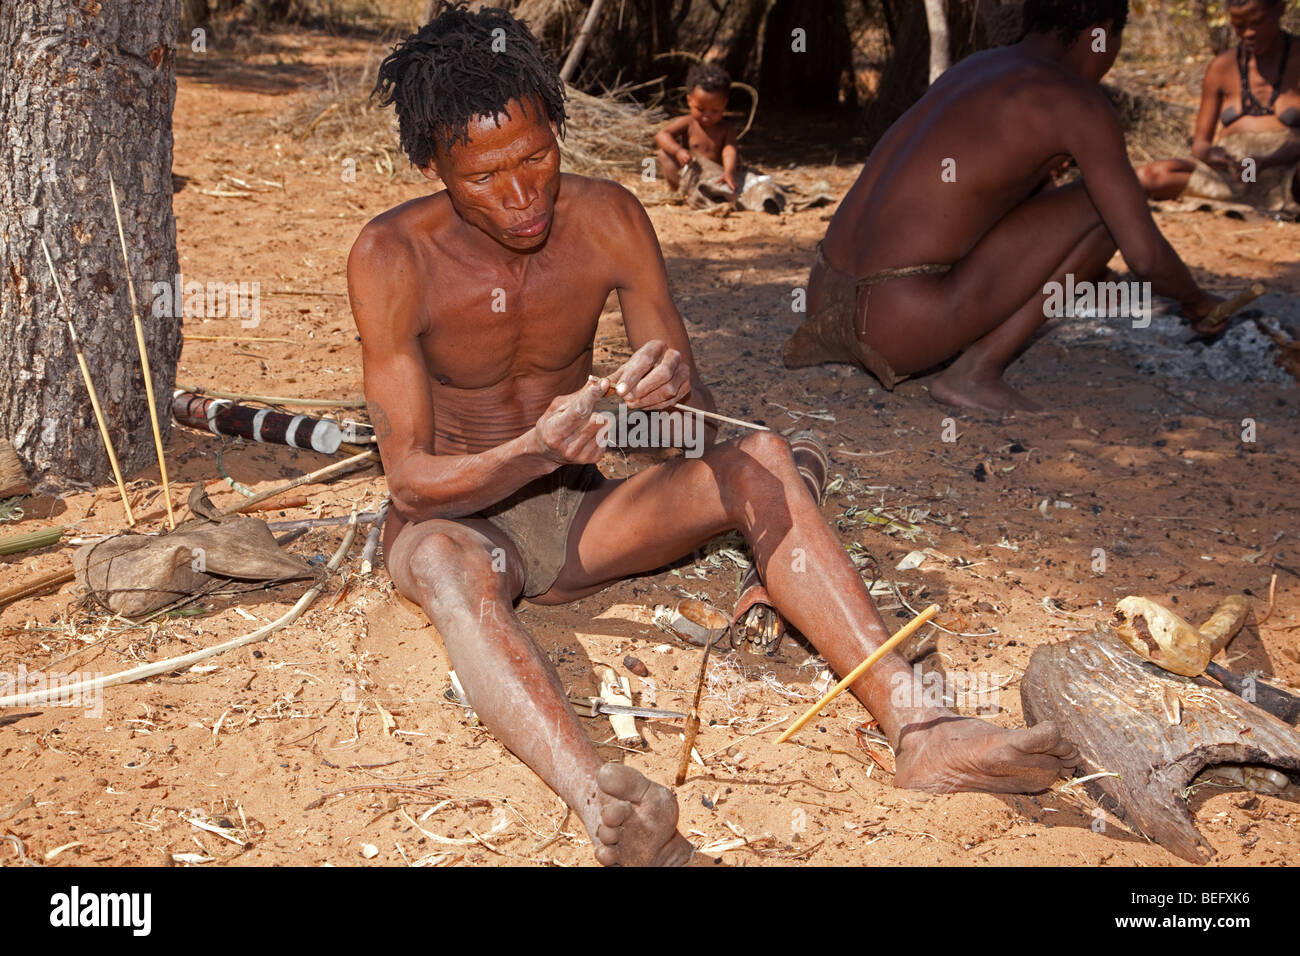 San Village. Manufacturing a bow and arrow the traditional way. Making the arrow. Stock Photo